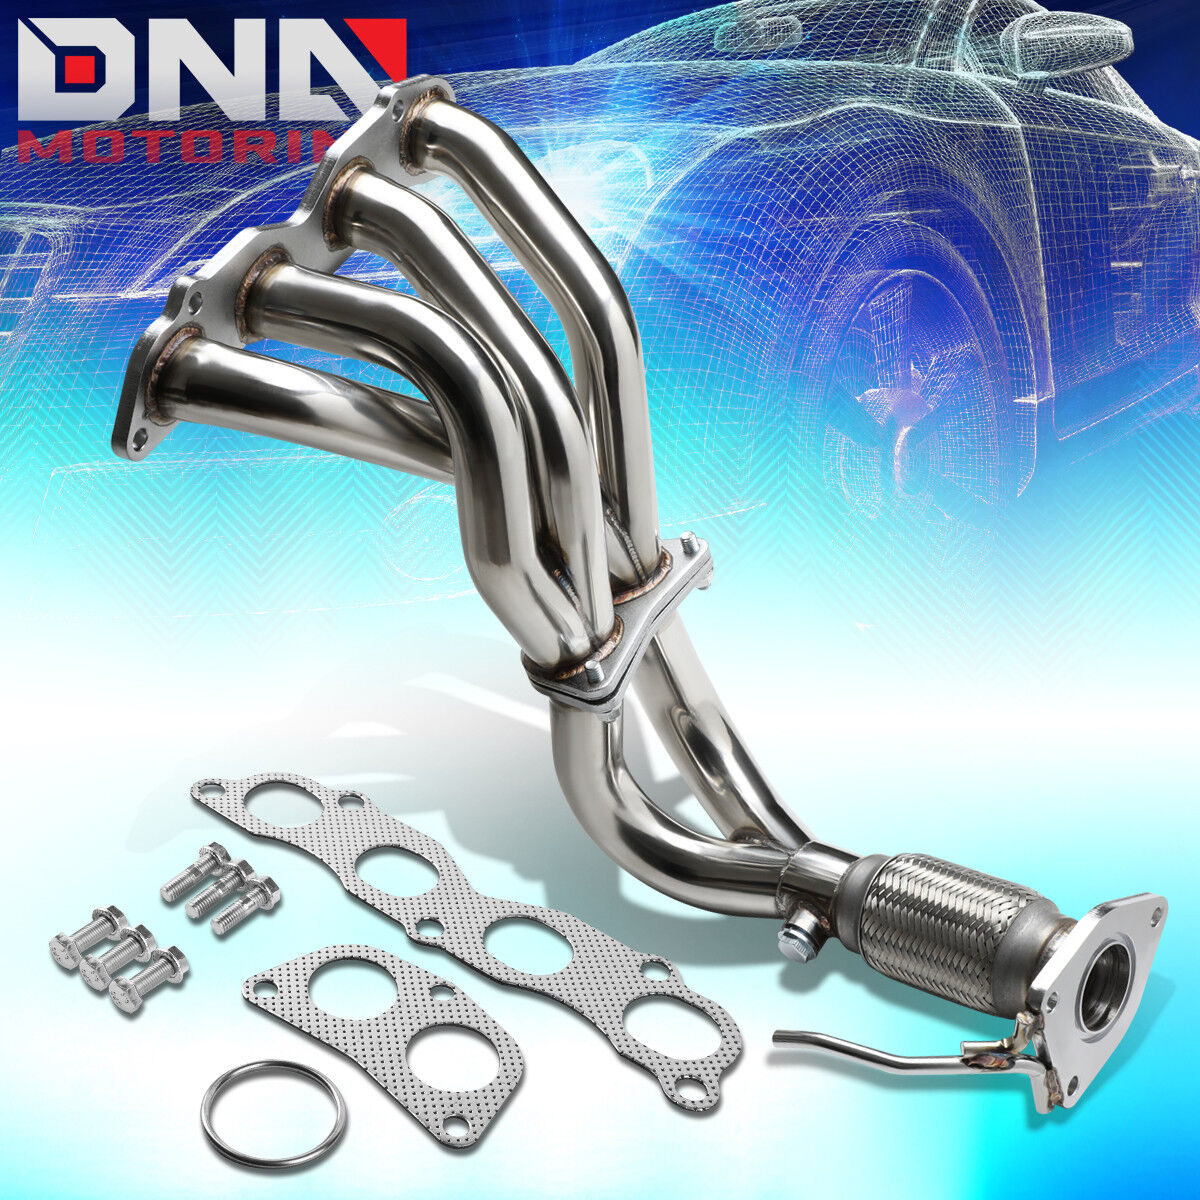 FOR 03-07 HONDA ACCORD 2.4 K24A4 T-304 STAINLESS PERFORMANCE HEADER EXHAUST